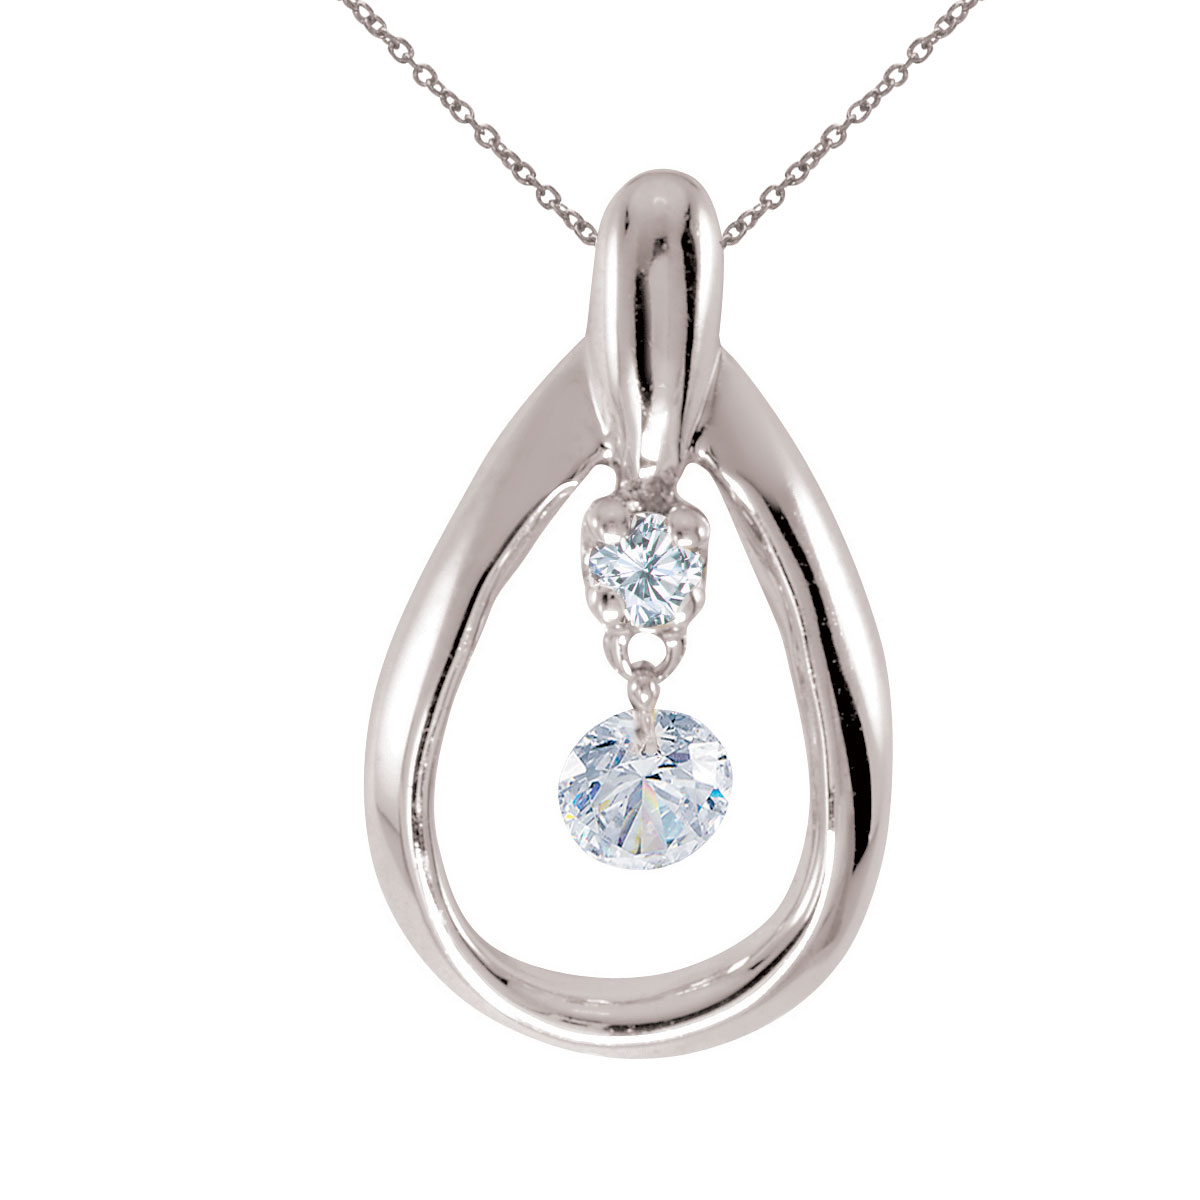 JCX2848: 14k gold Dashinng Diamonds pendant with 0.15 total ct diamonds. The center dangling diamond dances and shimmers with every heartbeat.